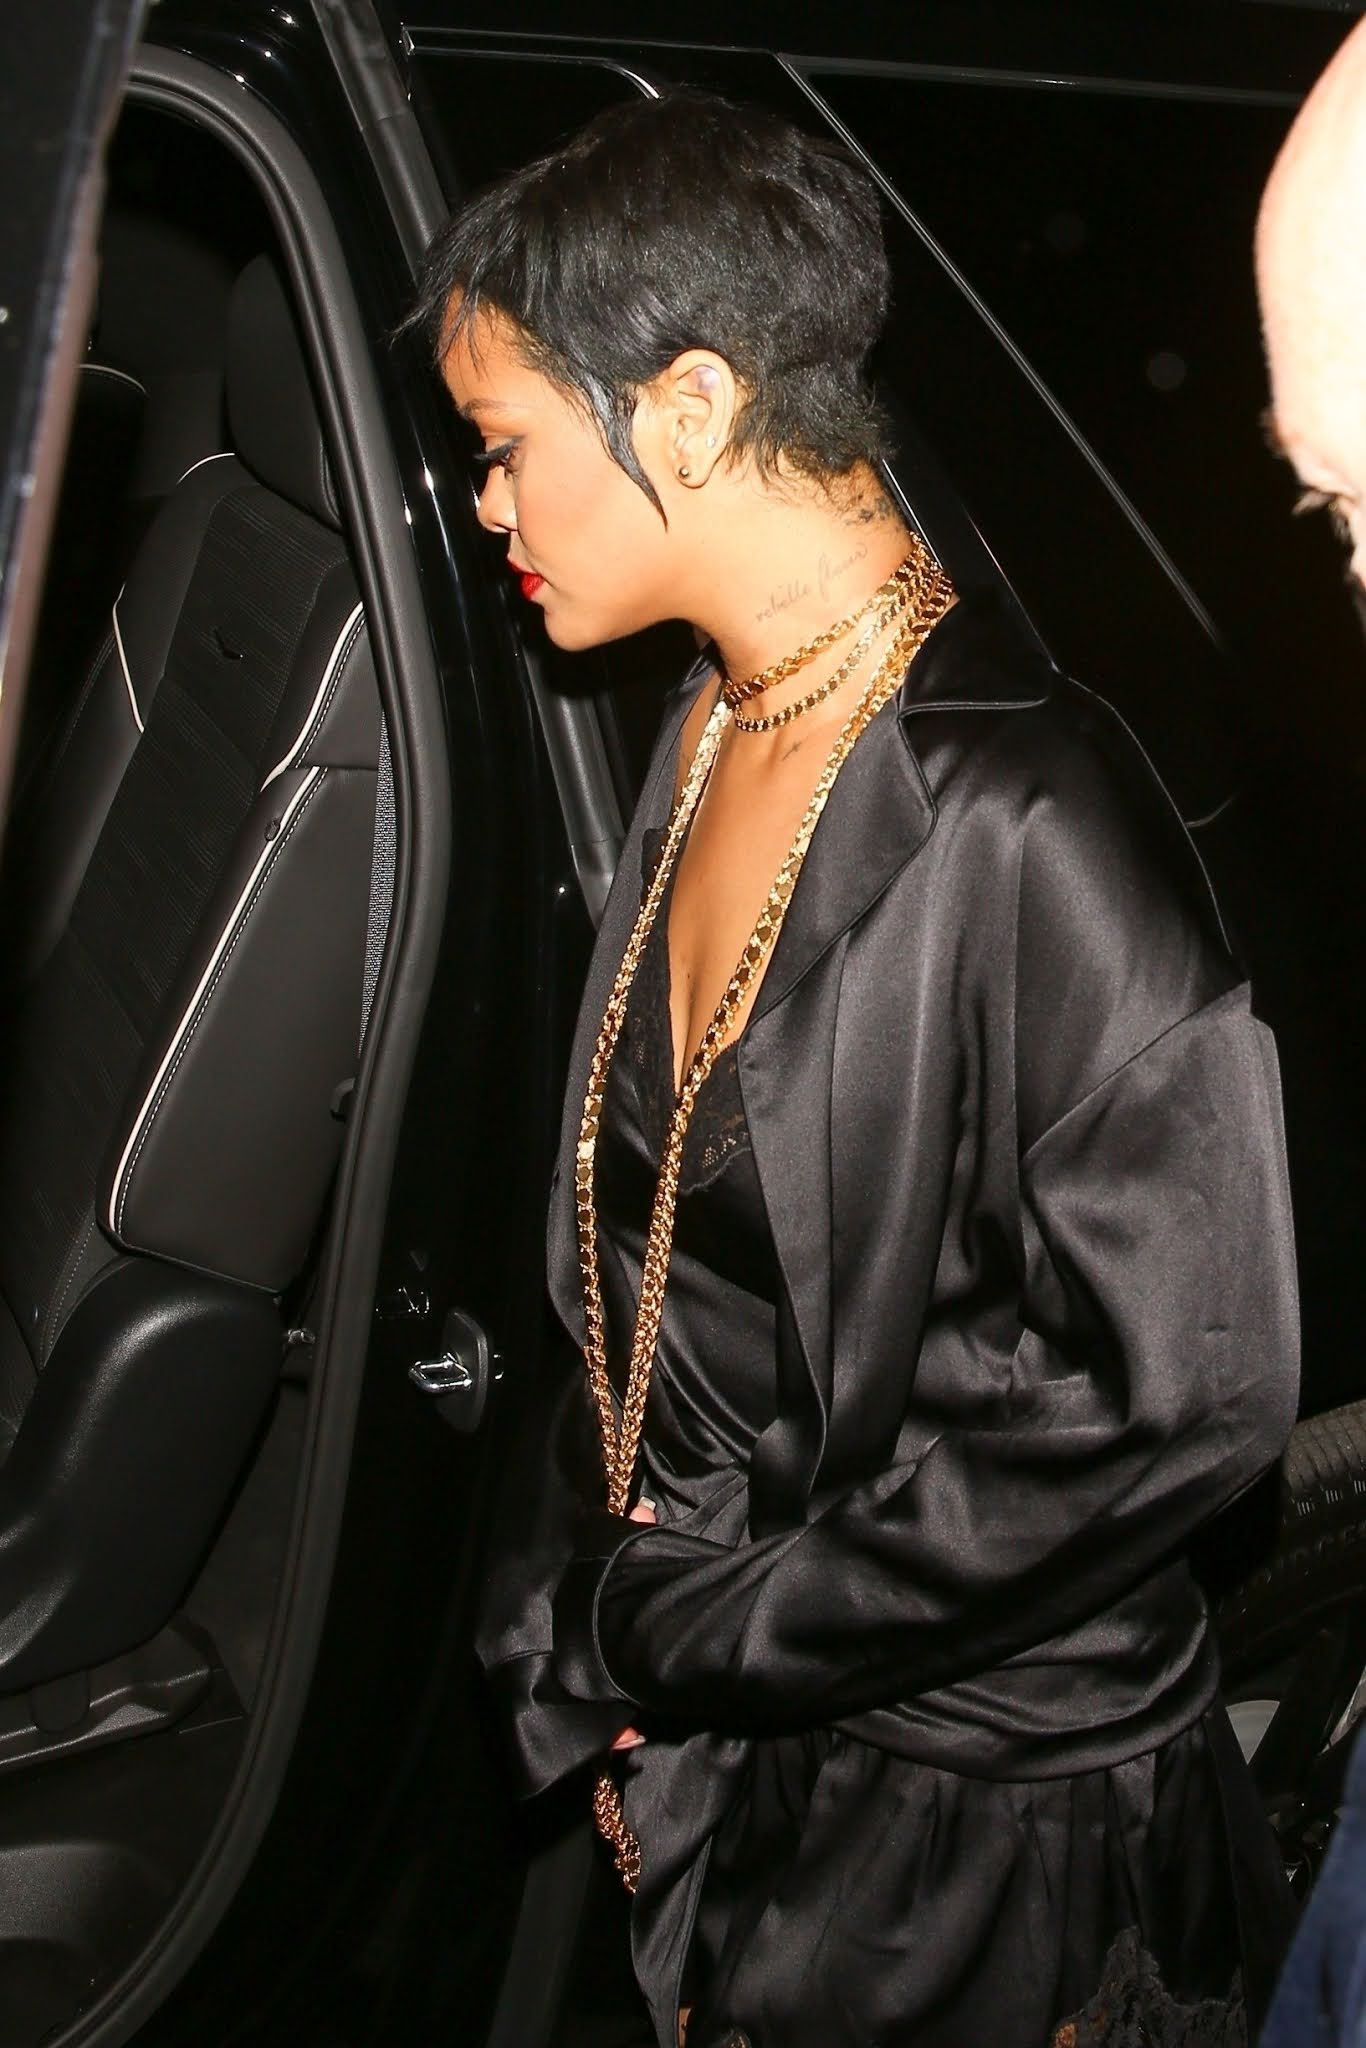 Rihanna in a slinky lingerie set for night out with friends at Delilah nightclub.